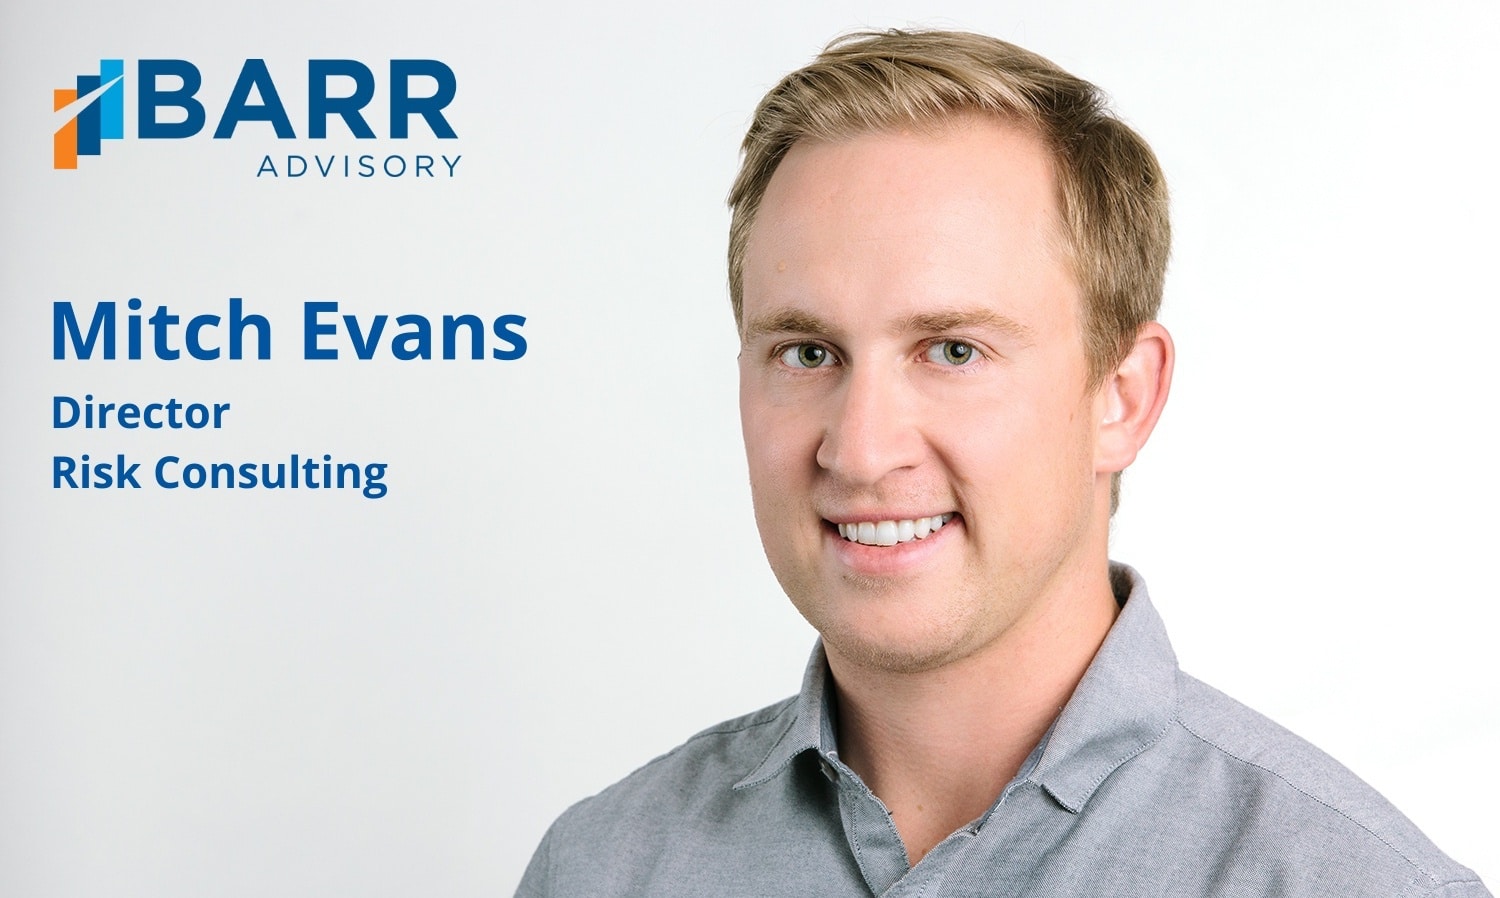 Meet Mitch Evans, Director of Risk Consulting